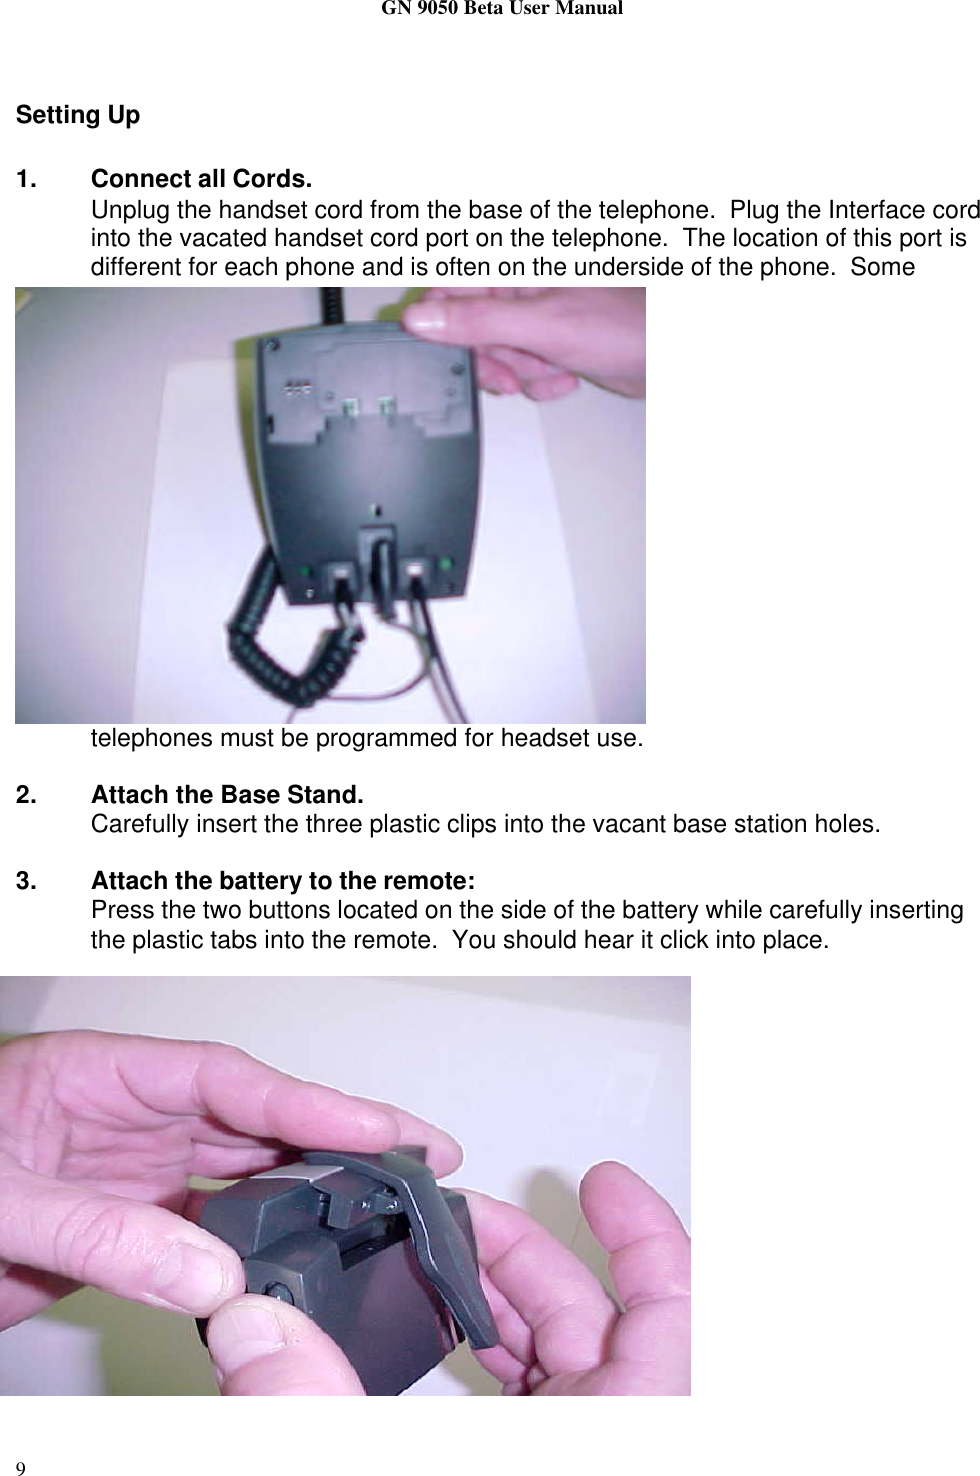 GN 9050 Beta User Manual9Setting Up1. Connect all Cords.Unplug the handset cord from the base of the telephone.  Plug the Interface cordinto the vacated handset cord port on the telephone.  The location of this port isdifferent for each phone and is often on the underside of the phone.  Sometelephones must be programmed for headset use.2. Attach the Base Stand.Carefully insert the three plastic clips into the vacant base station holes.3. Attach the battery to the remote:Press the two buttons located on the side of the battery while carefully insertingthe plastic tabs into the remote.  You should hear it click into place.